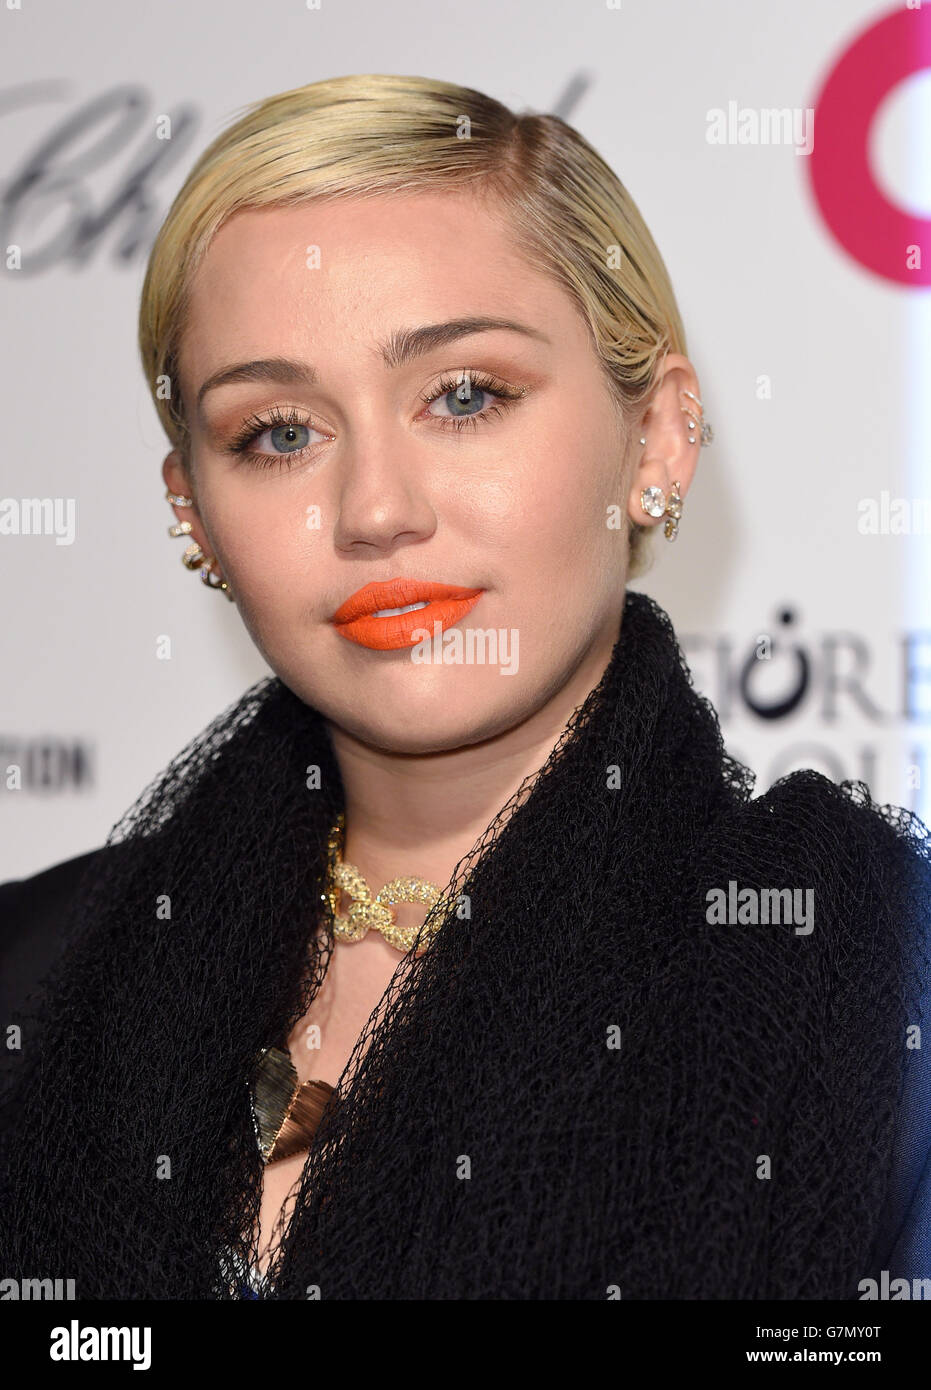 Miley Cyrus arrives for the Elton John AIDS Foundation's 23rd annual Academy Awards Viewing Party at West Hollywood Park in Los Angeles. Stock Photo